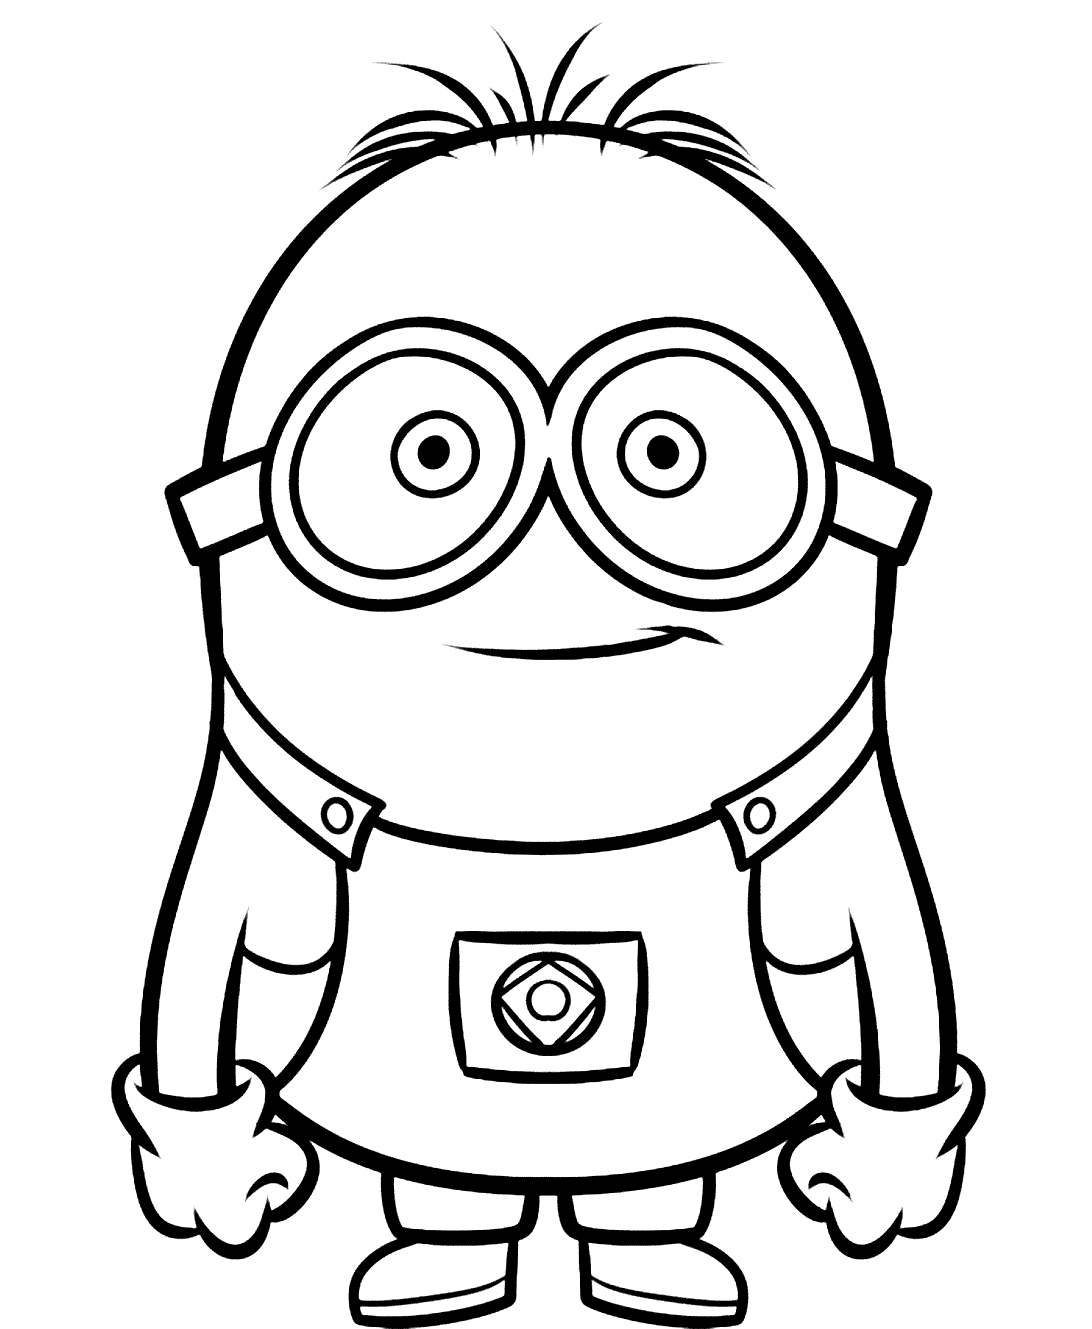 Smiley Minion Despicable Me Coloring Pages